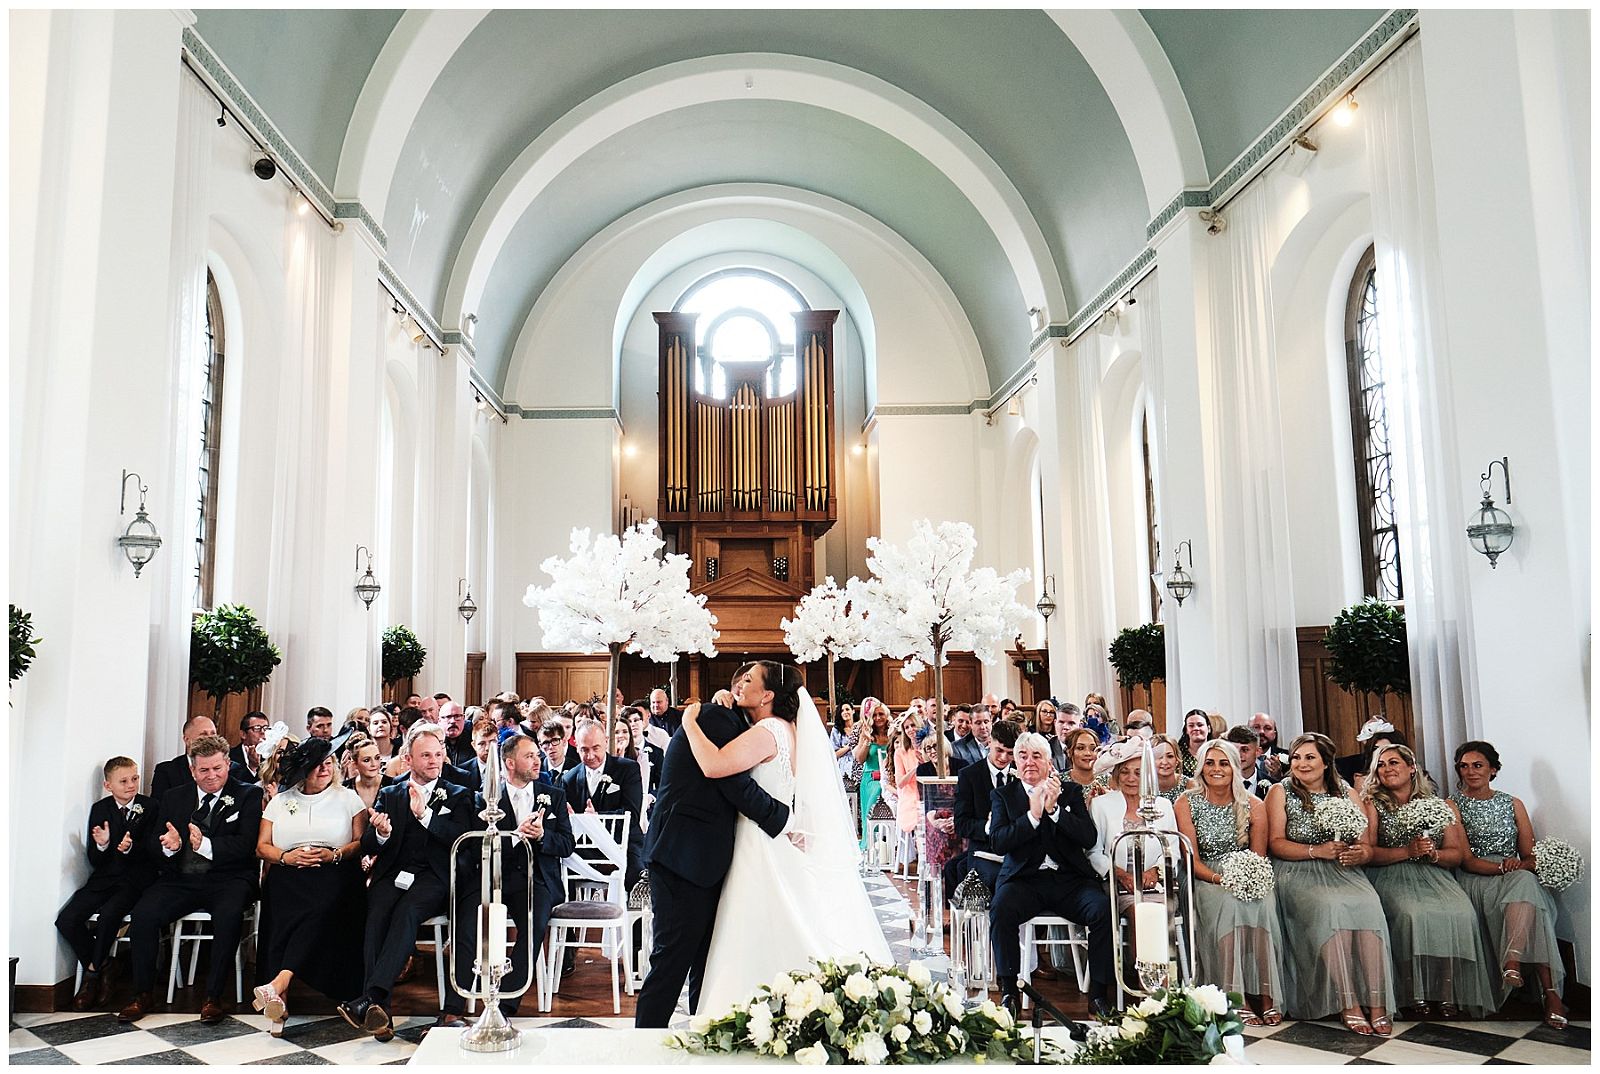 Stunning memories with the best reaction to being announced finally as husband and wife at Hawkstone Hall in Shrewsbury by Documentary Wedding Photographer Stuart James